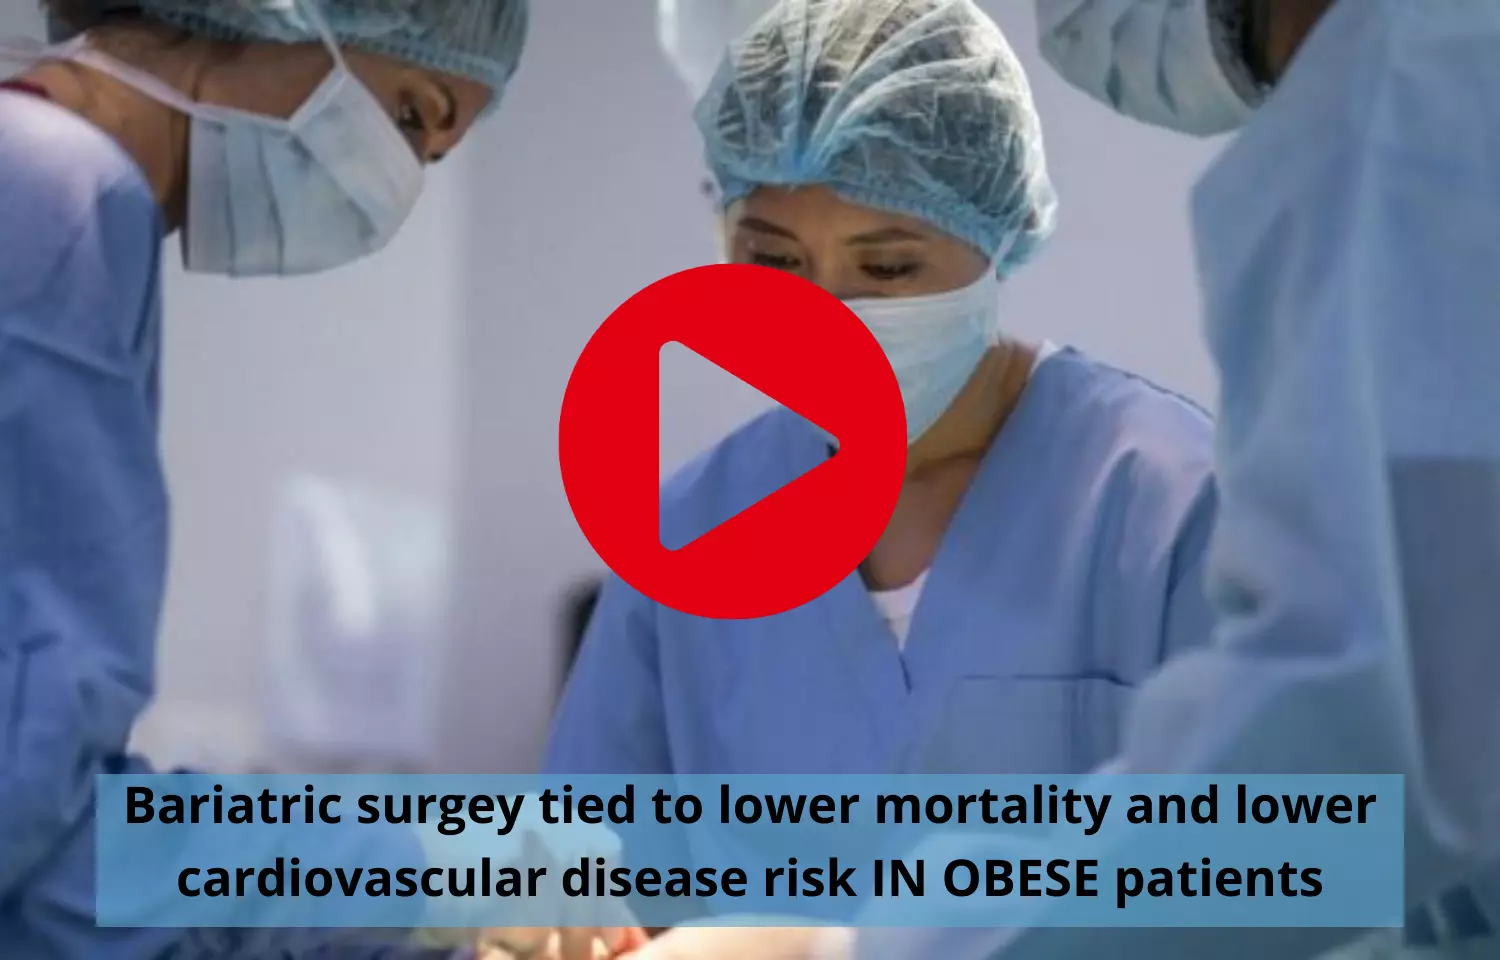 Bariatric surgery to cause lower mortality and lower cardiovascular disease risk in OBESE patients